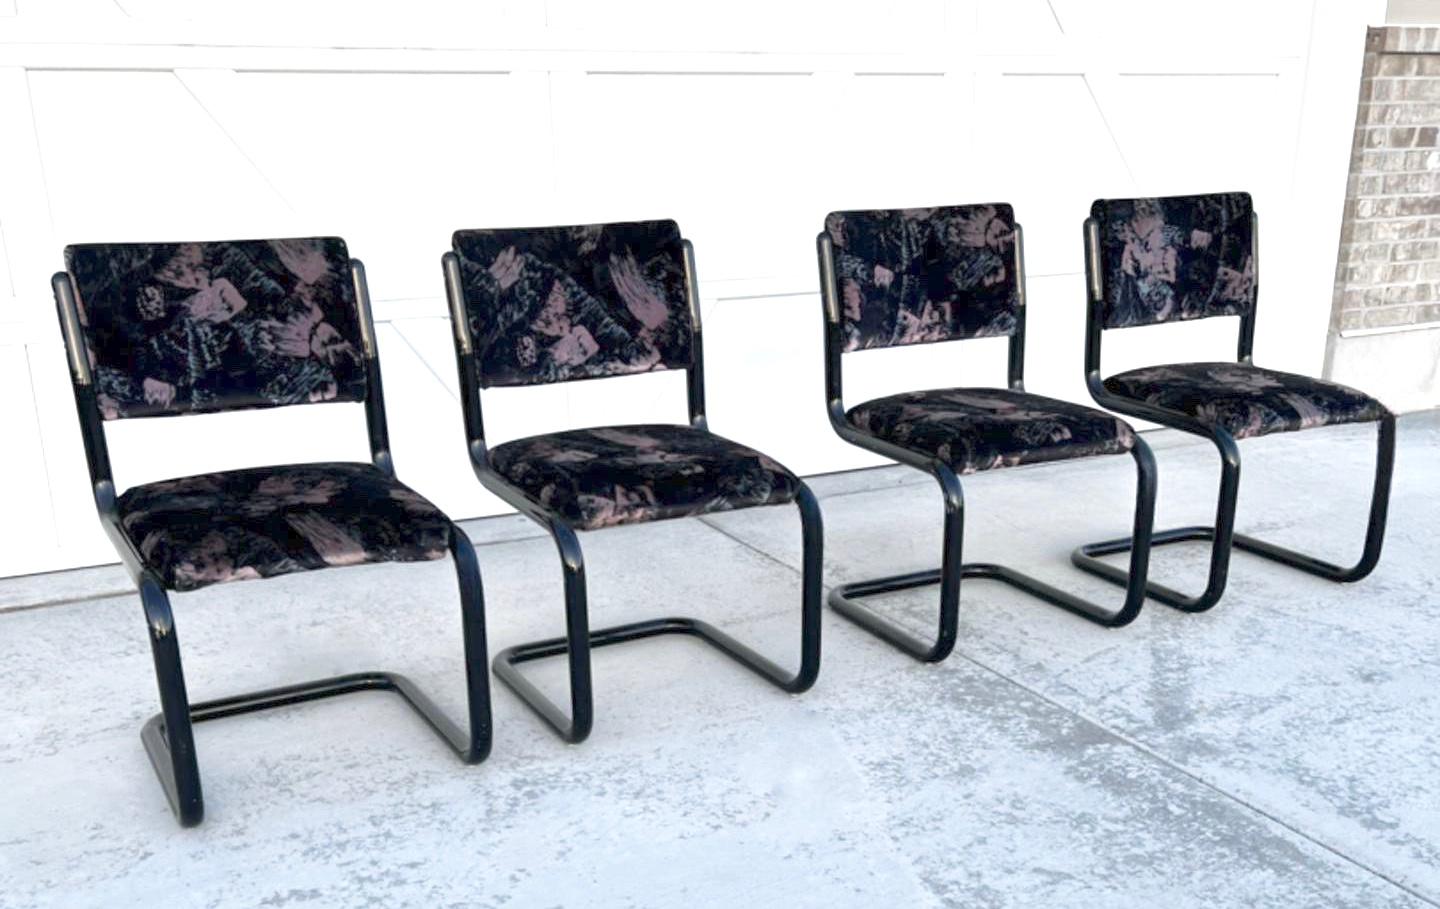 Four post-modern tubular cantilever chairs manufactured by Douglas Furniture. Features jet black enameled metal tube frames with soft iconic suede-like material featuring pastel brushstrokes of light blue and pink. The chairs and fabric are in